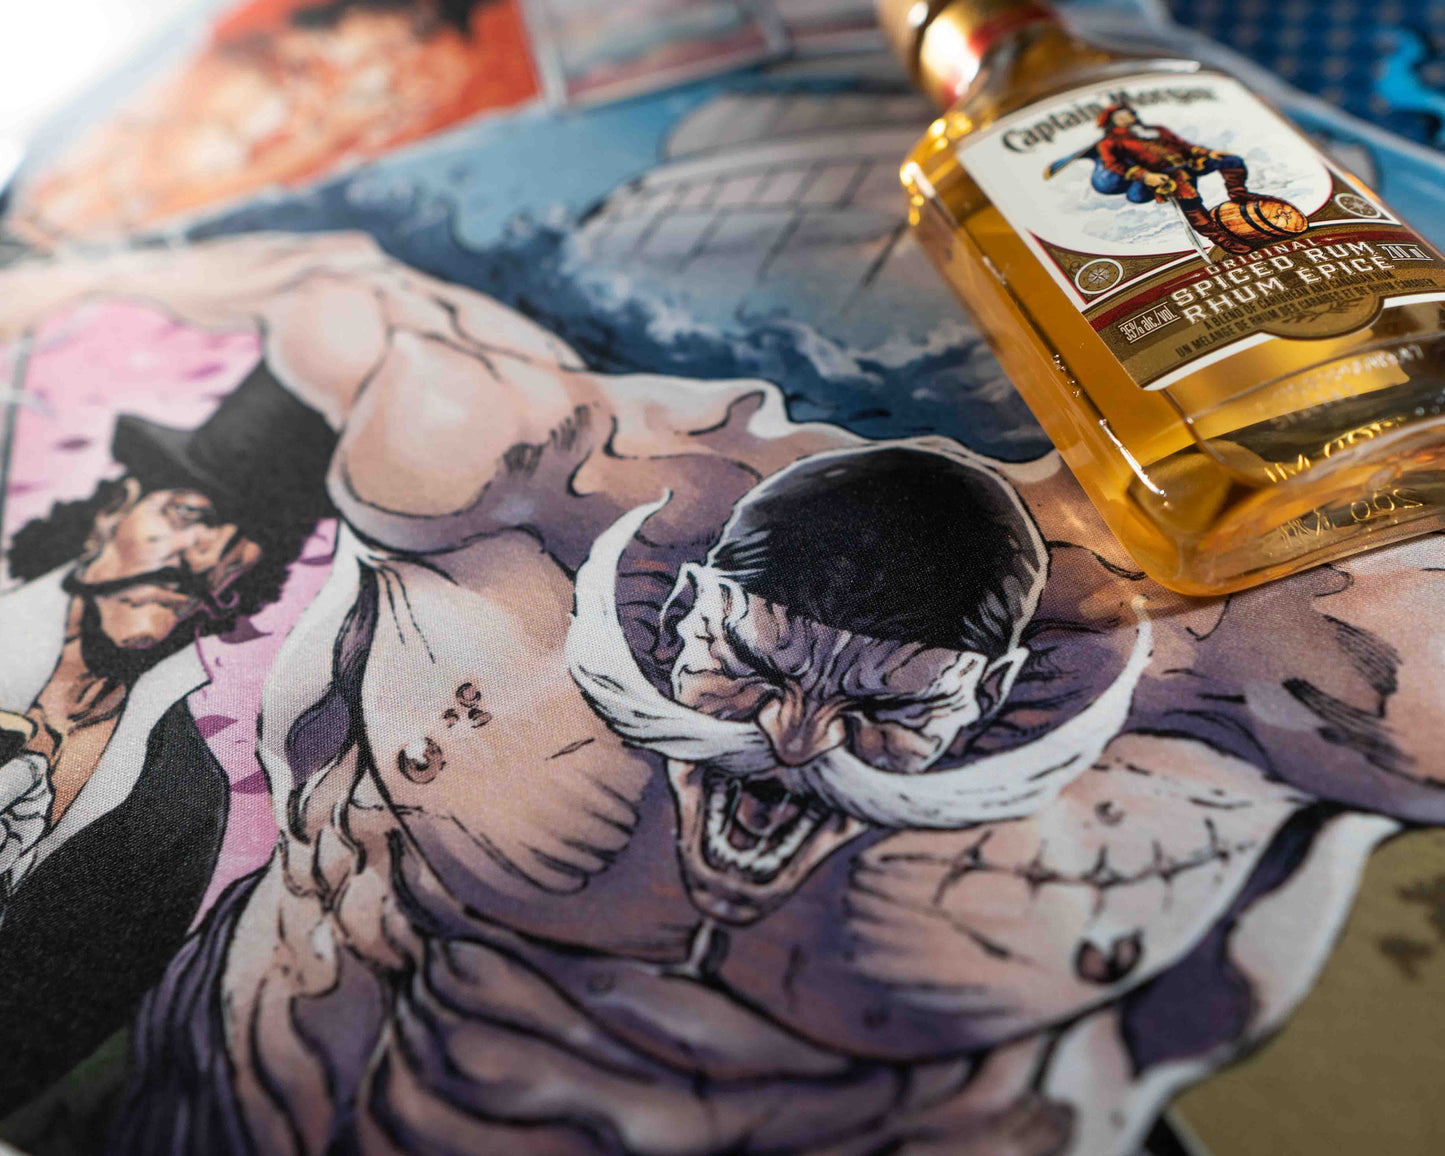 closeup of the world's strongest man with an intense look as he smashes the mat, featuring a bottle of Captain Morgan's Spiced Rum as a prop